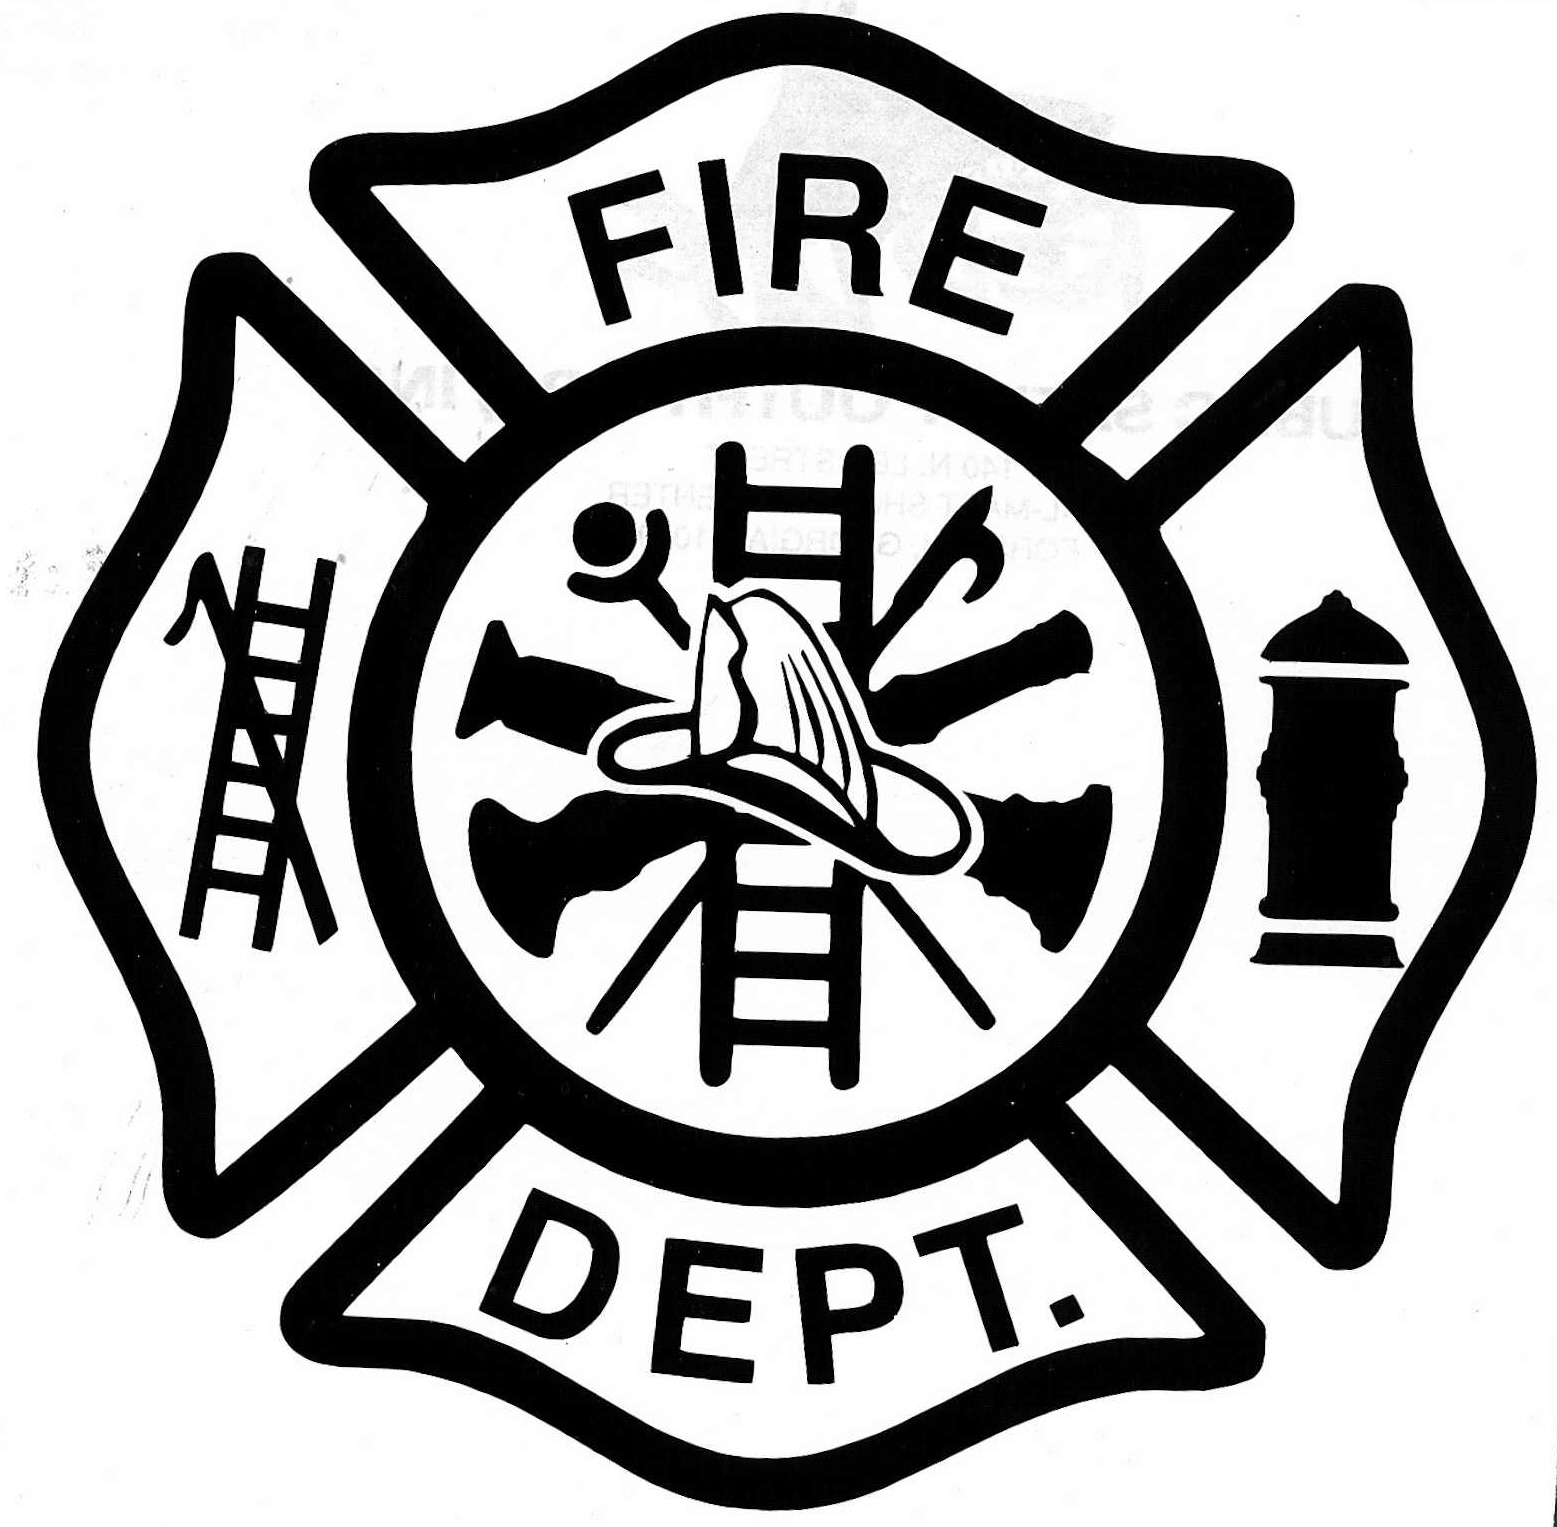 Firefighter Badges Coloring Pages Images & Pictures - Becuo